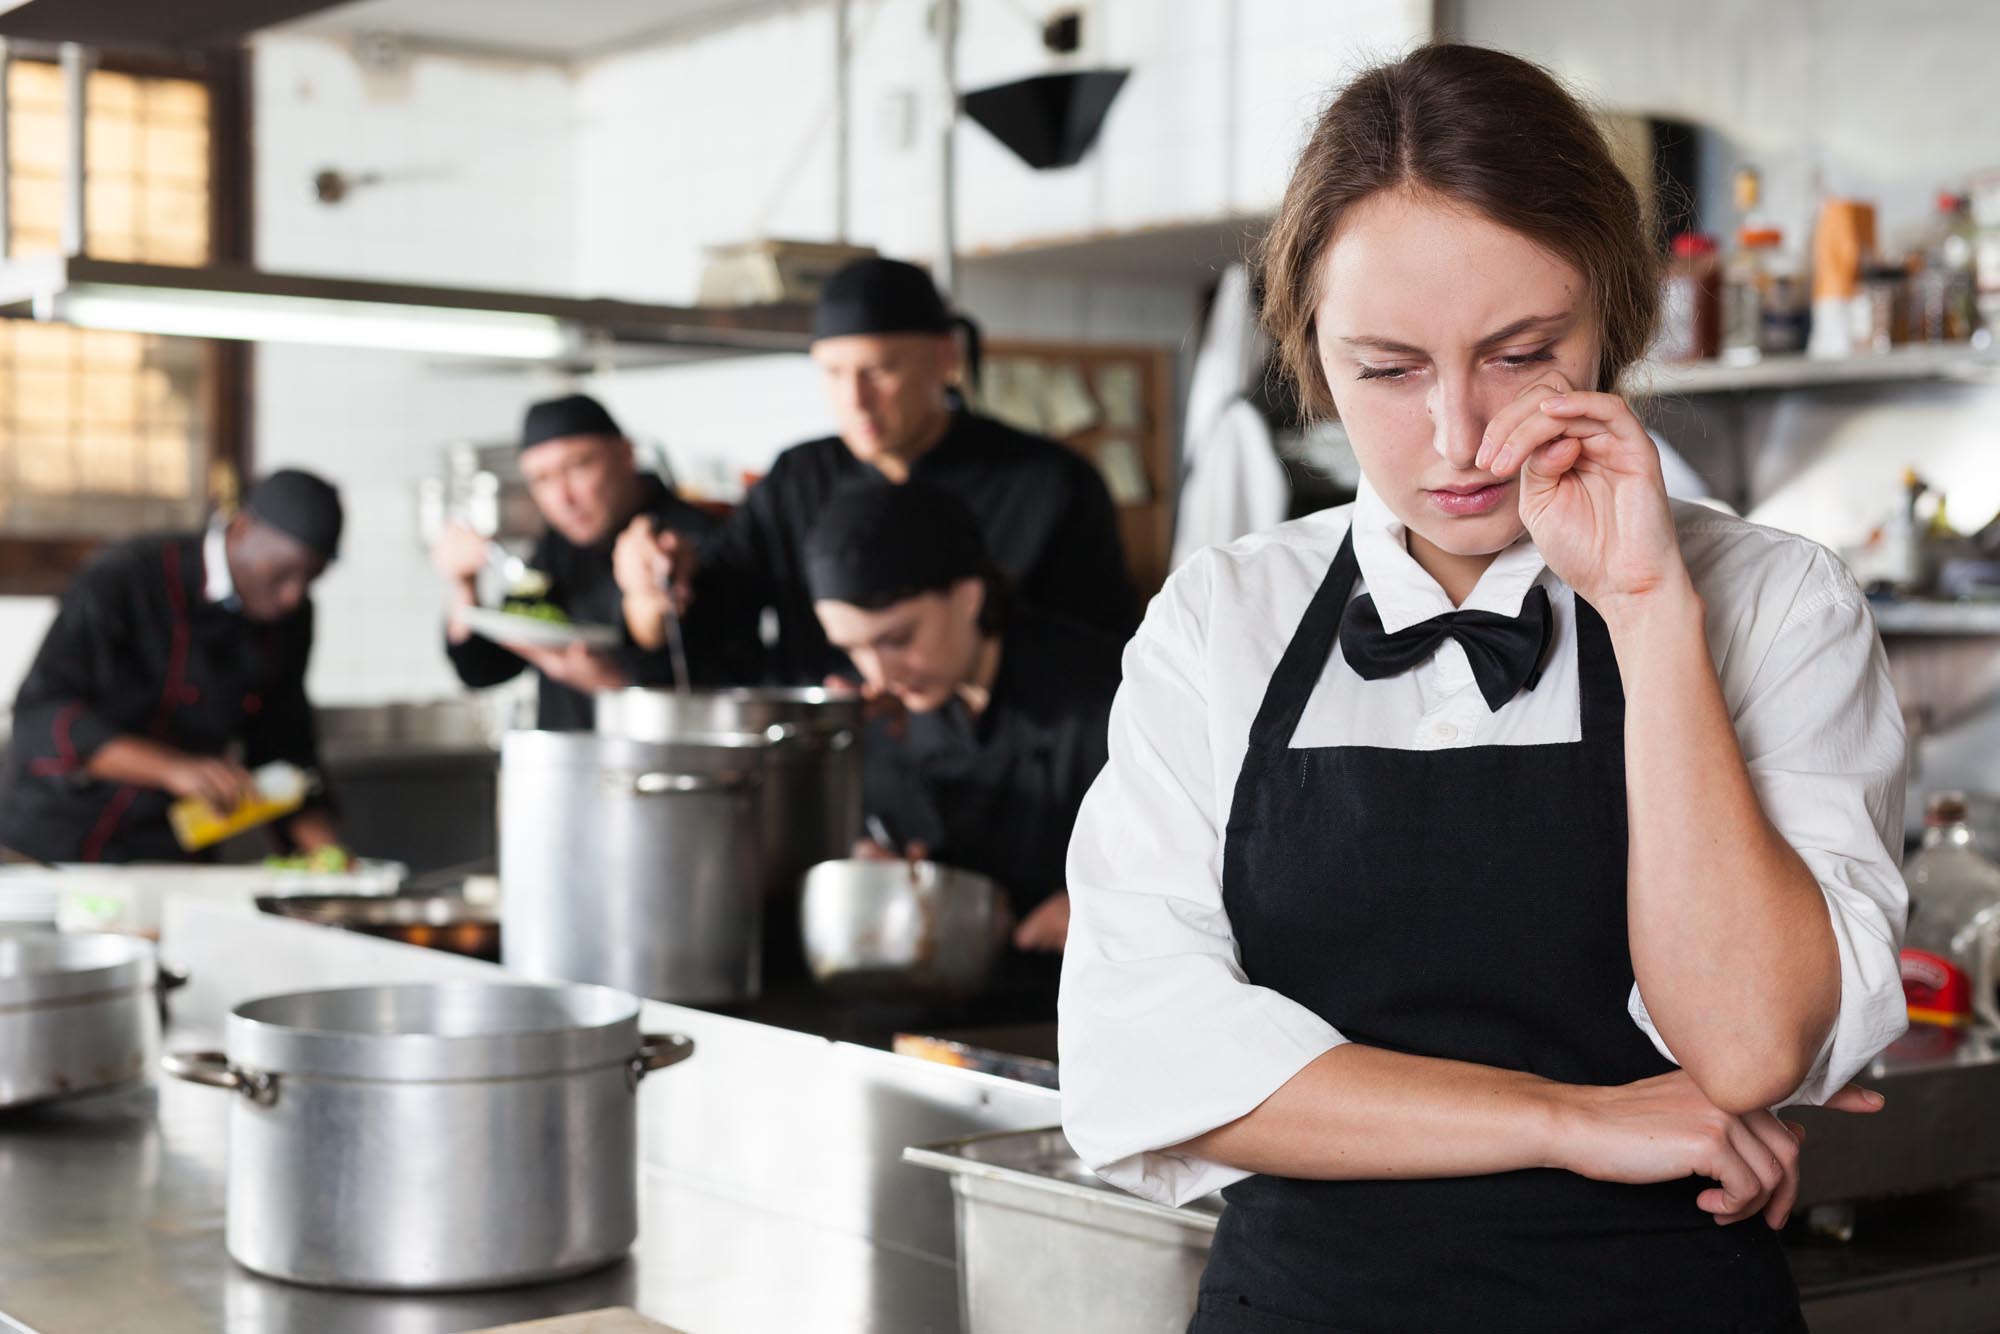 Workplace Harassment in the Restaurant Industry